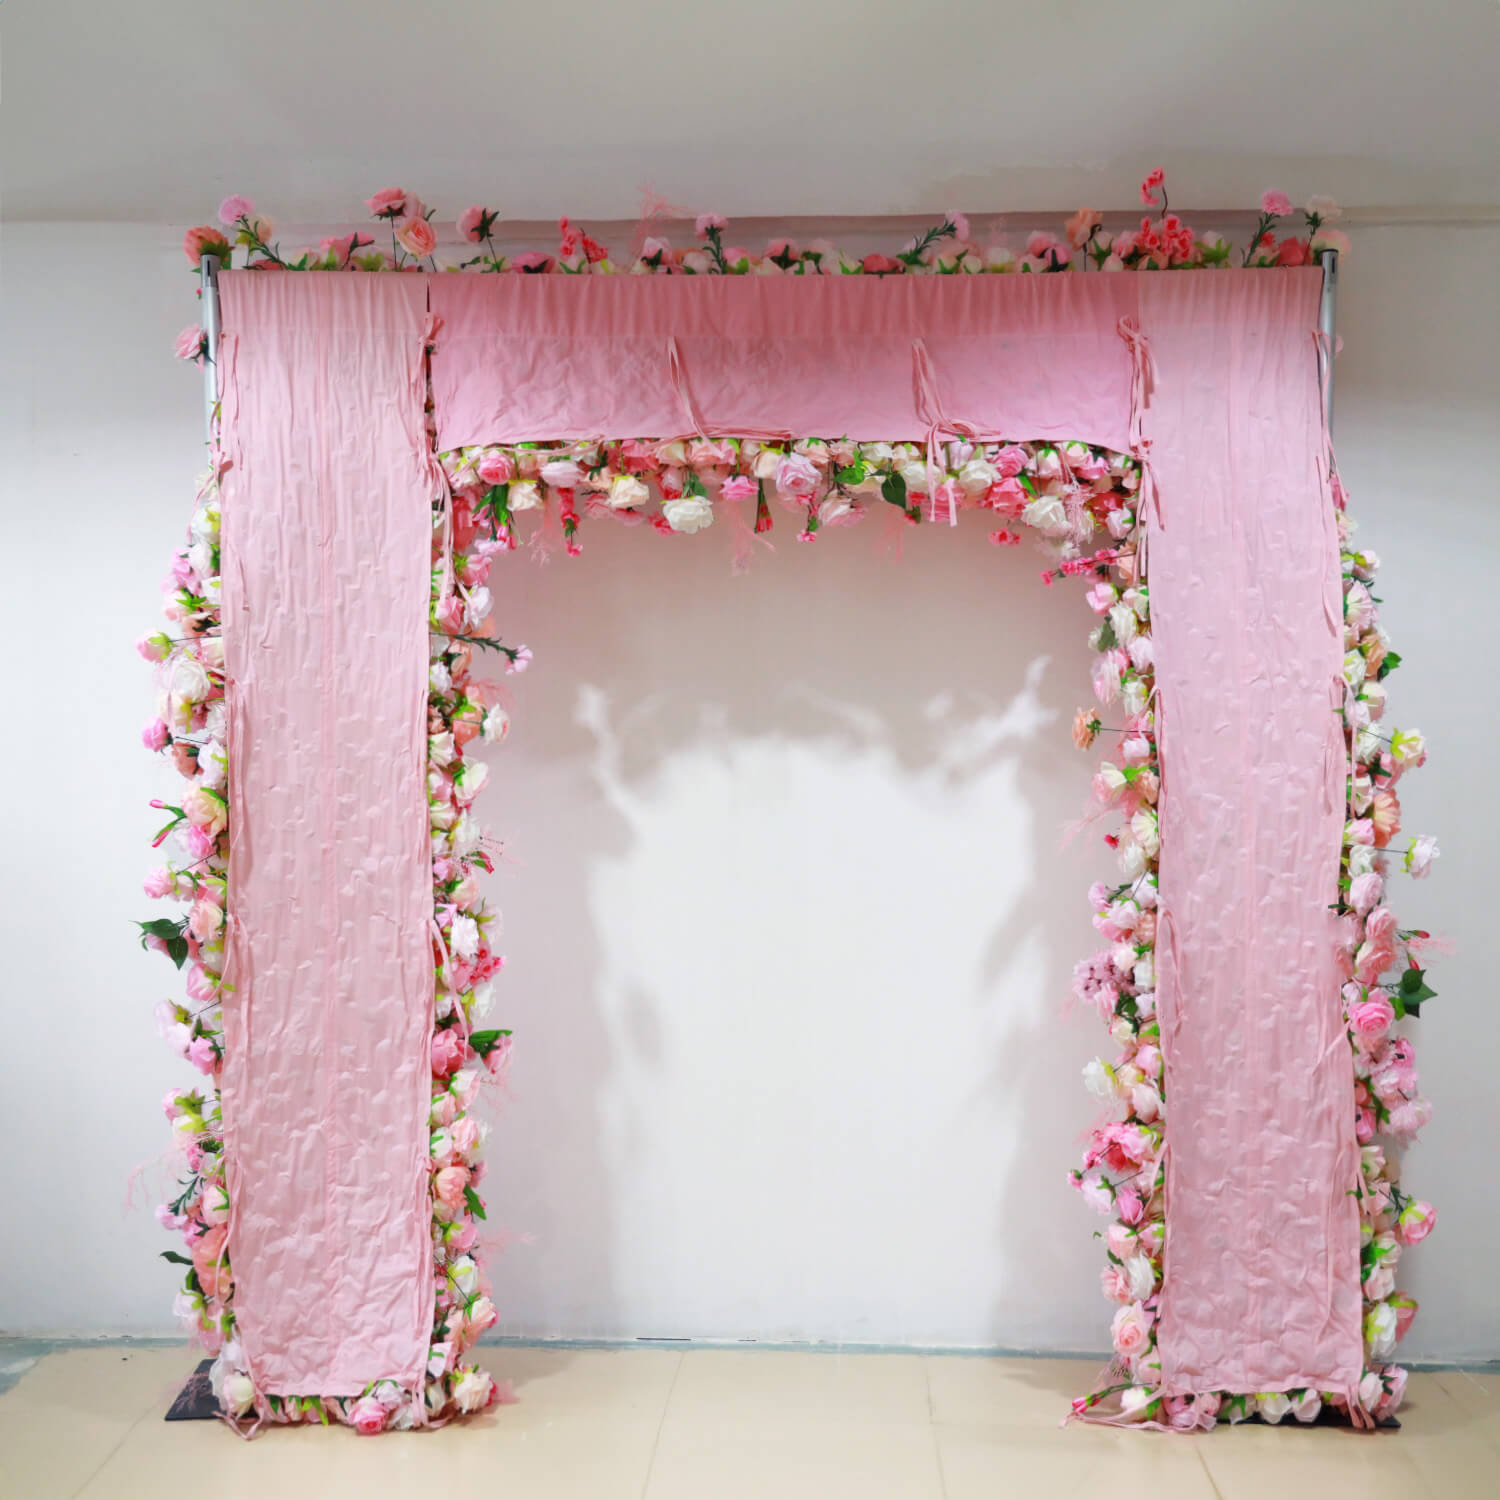 Pink fabric artificial flower wall arch looks romantic and  bright.